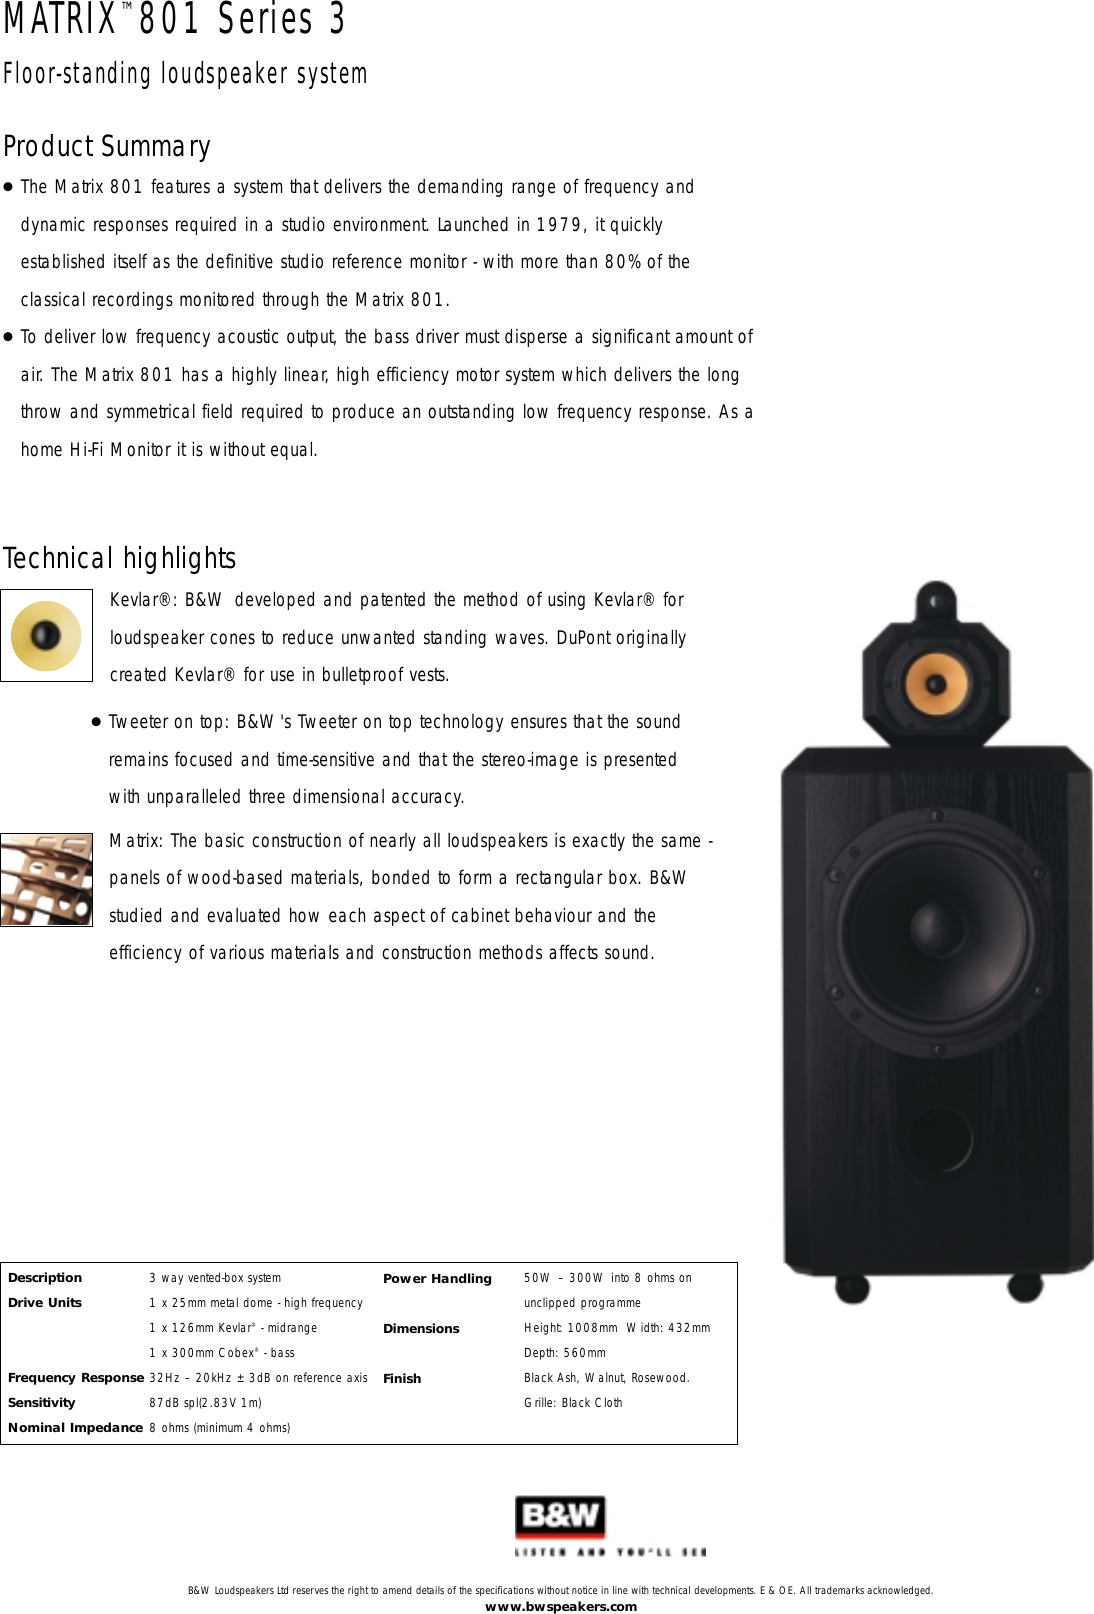 Bowers And Wilkins Matrix 801 Series 3 Users Manual